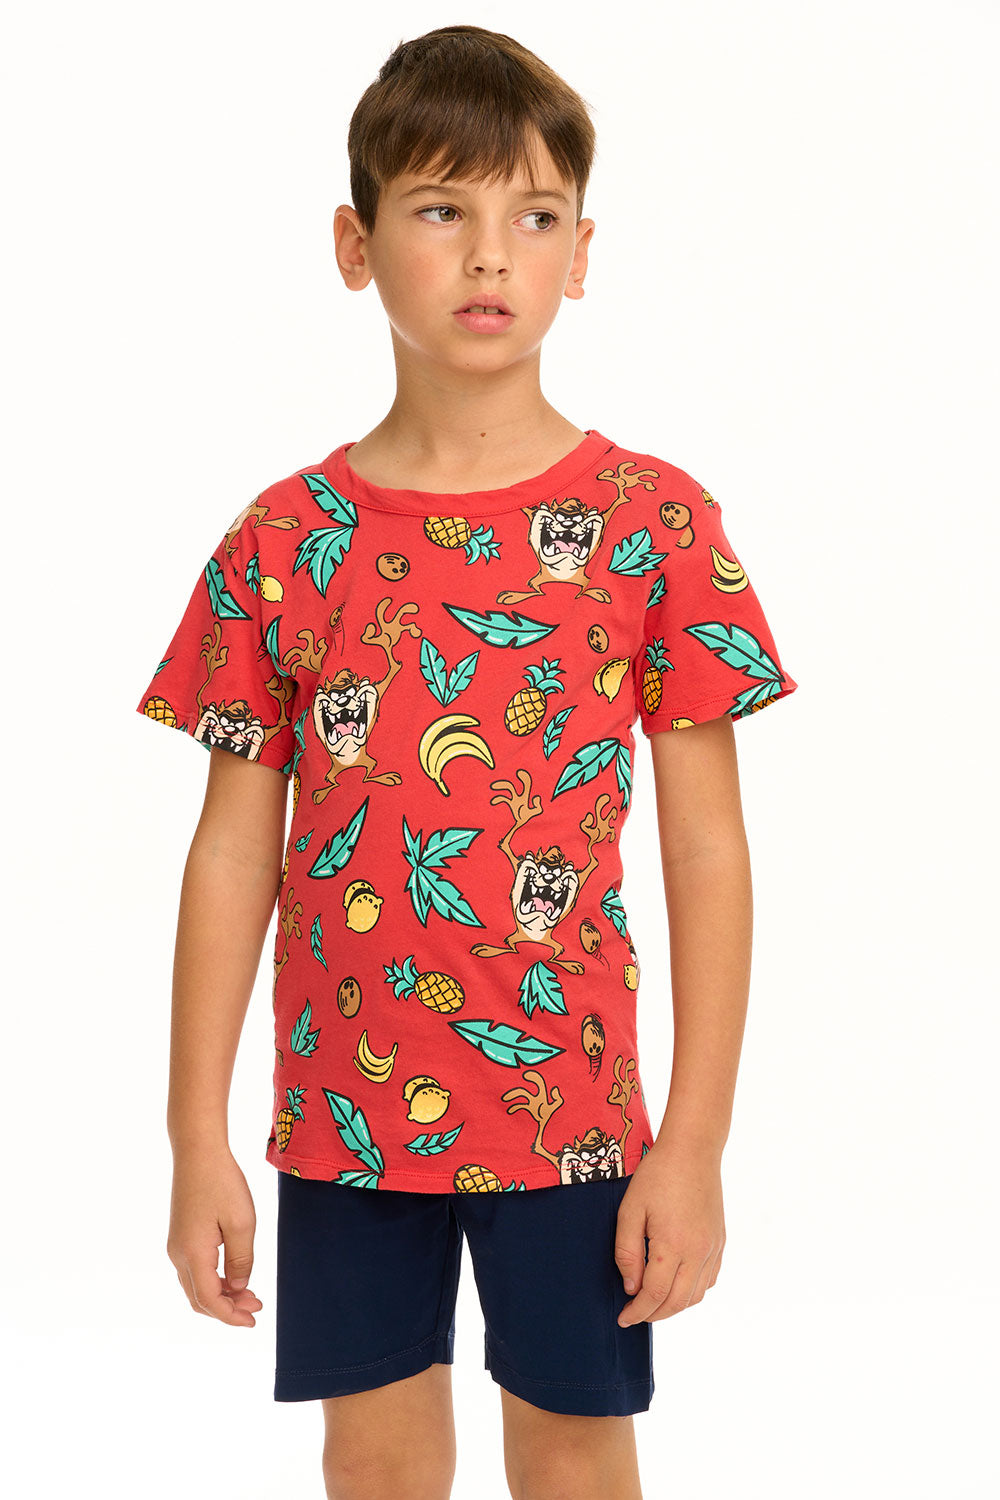 Looney Tunes - Tropical Taz Tee BOYS chaserbrand